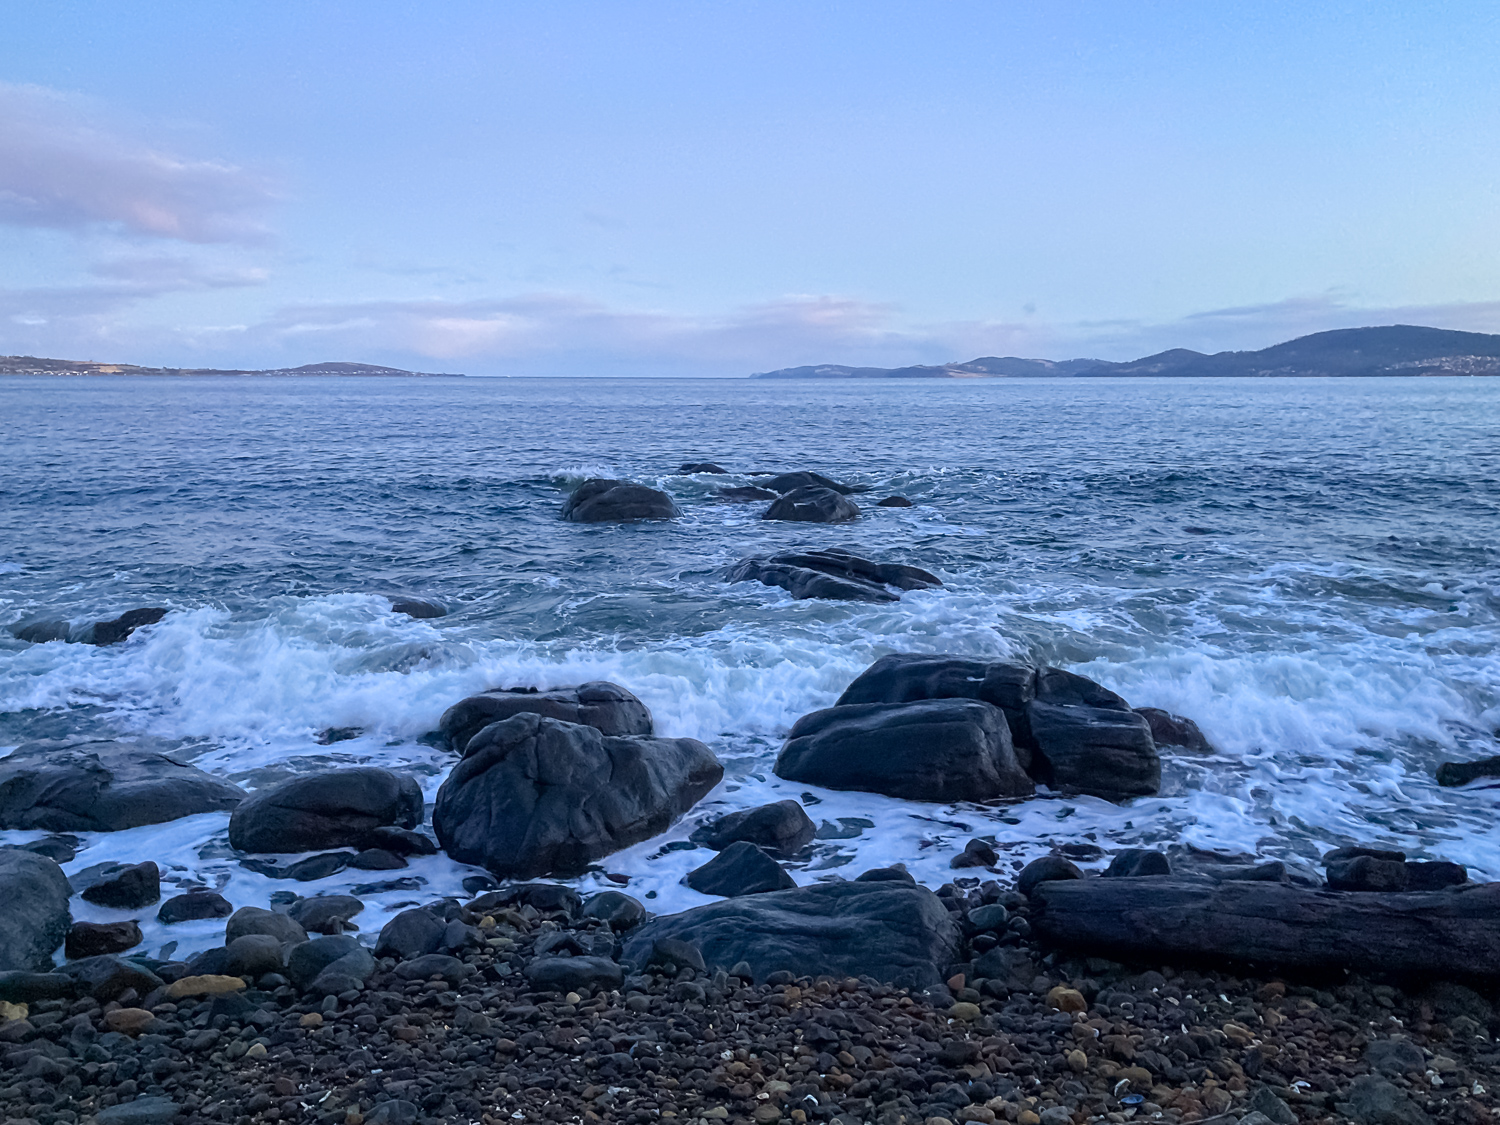 Water breaking over small rocks on a rocky shoreline, with low clouds over the horizon